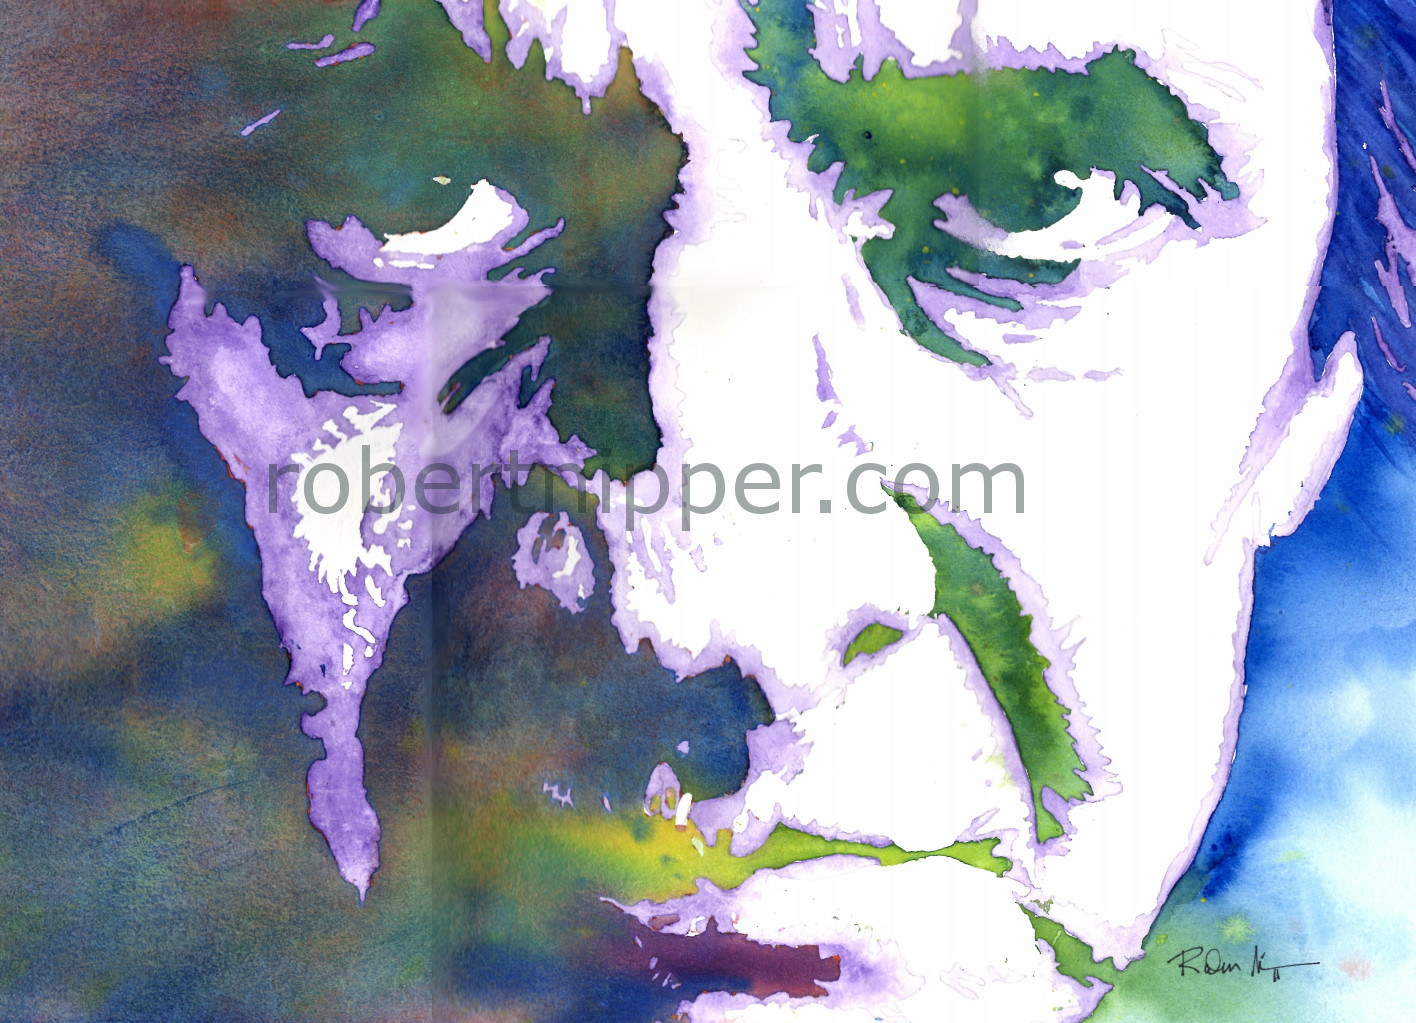 This is a watercolor portrait of Johnny Cash.